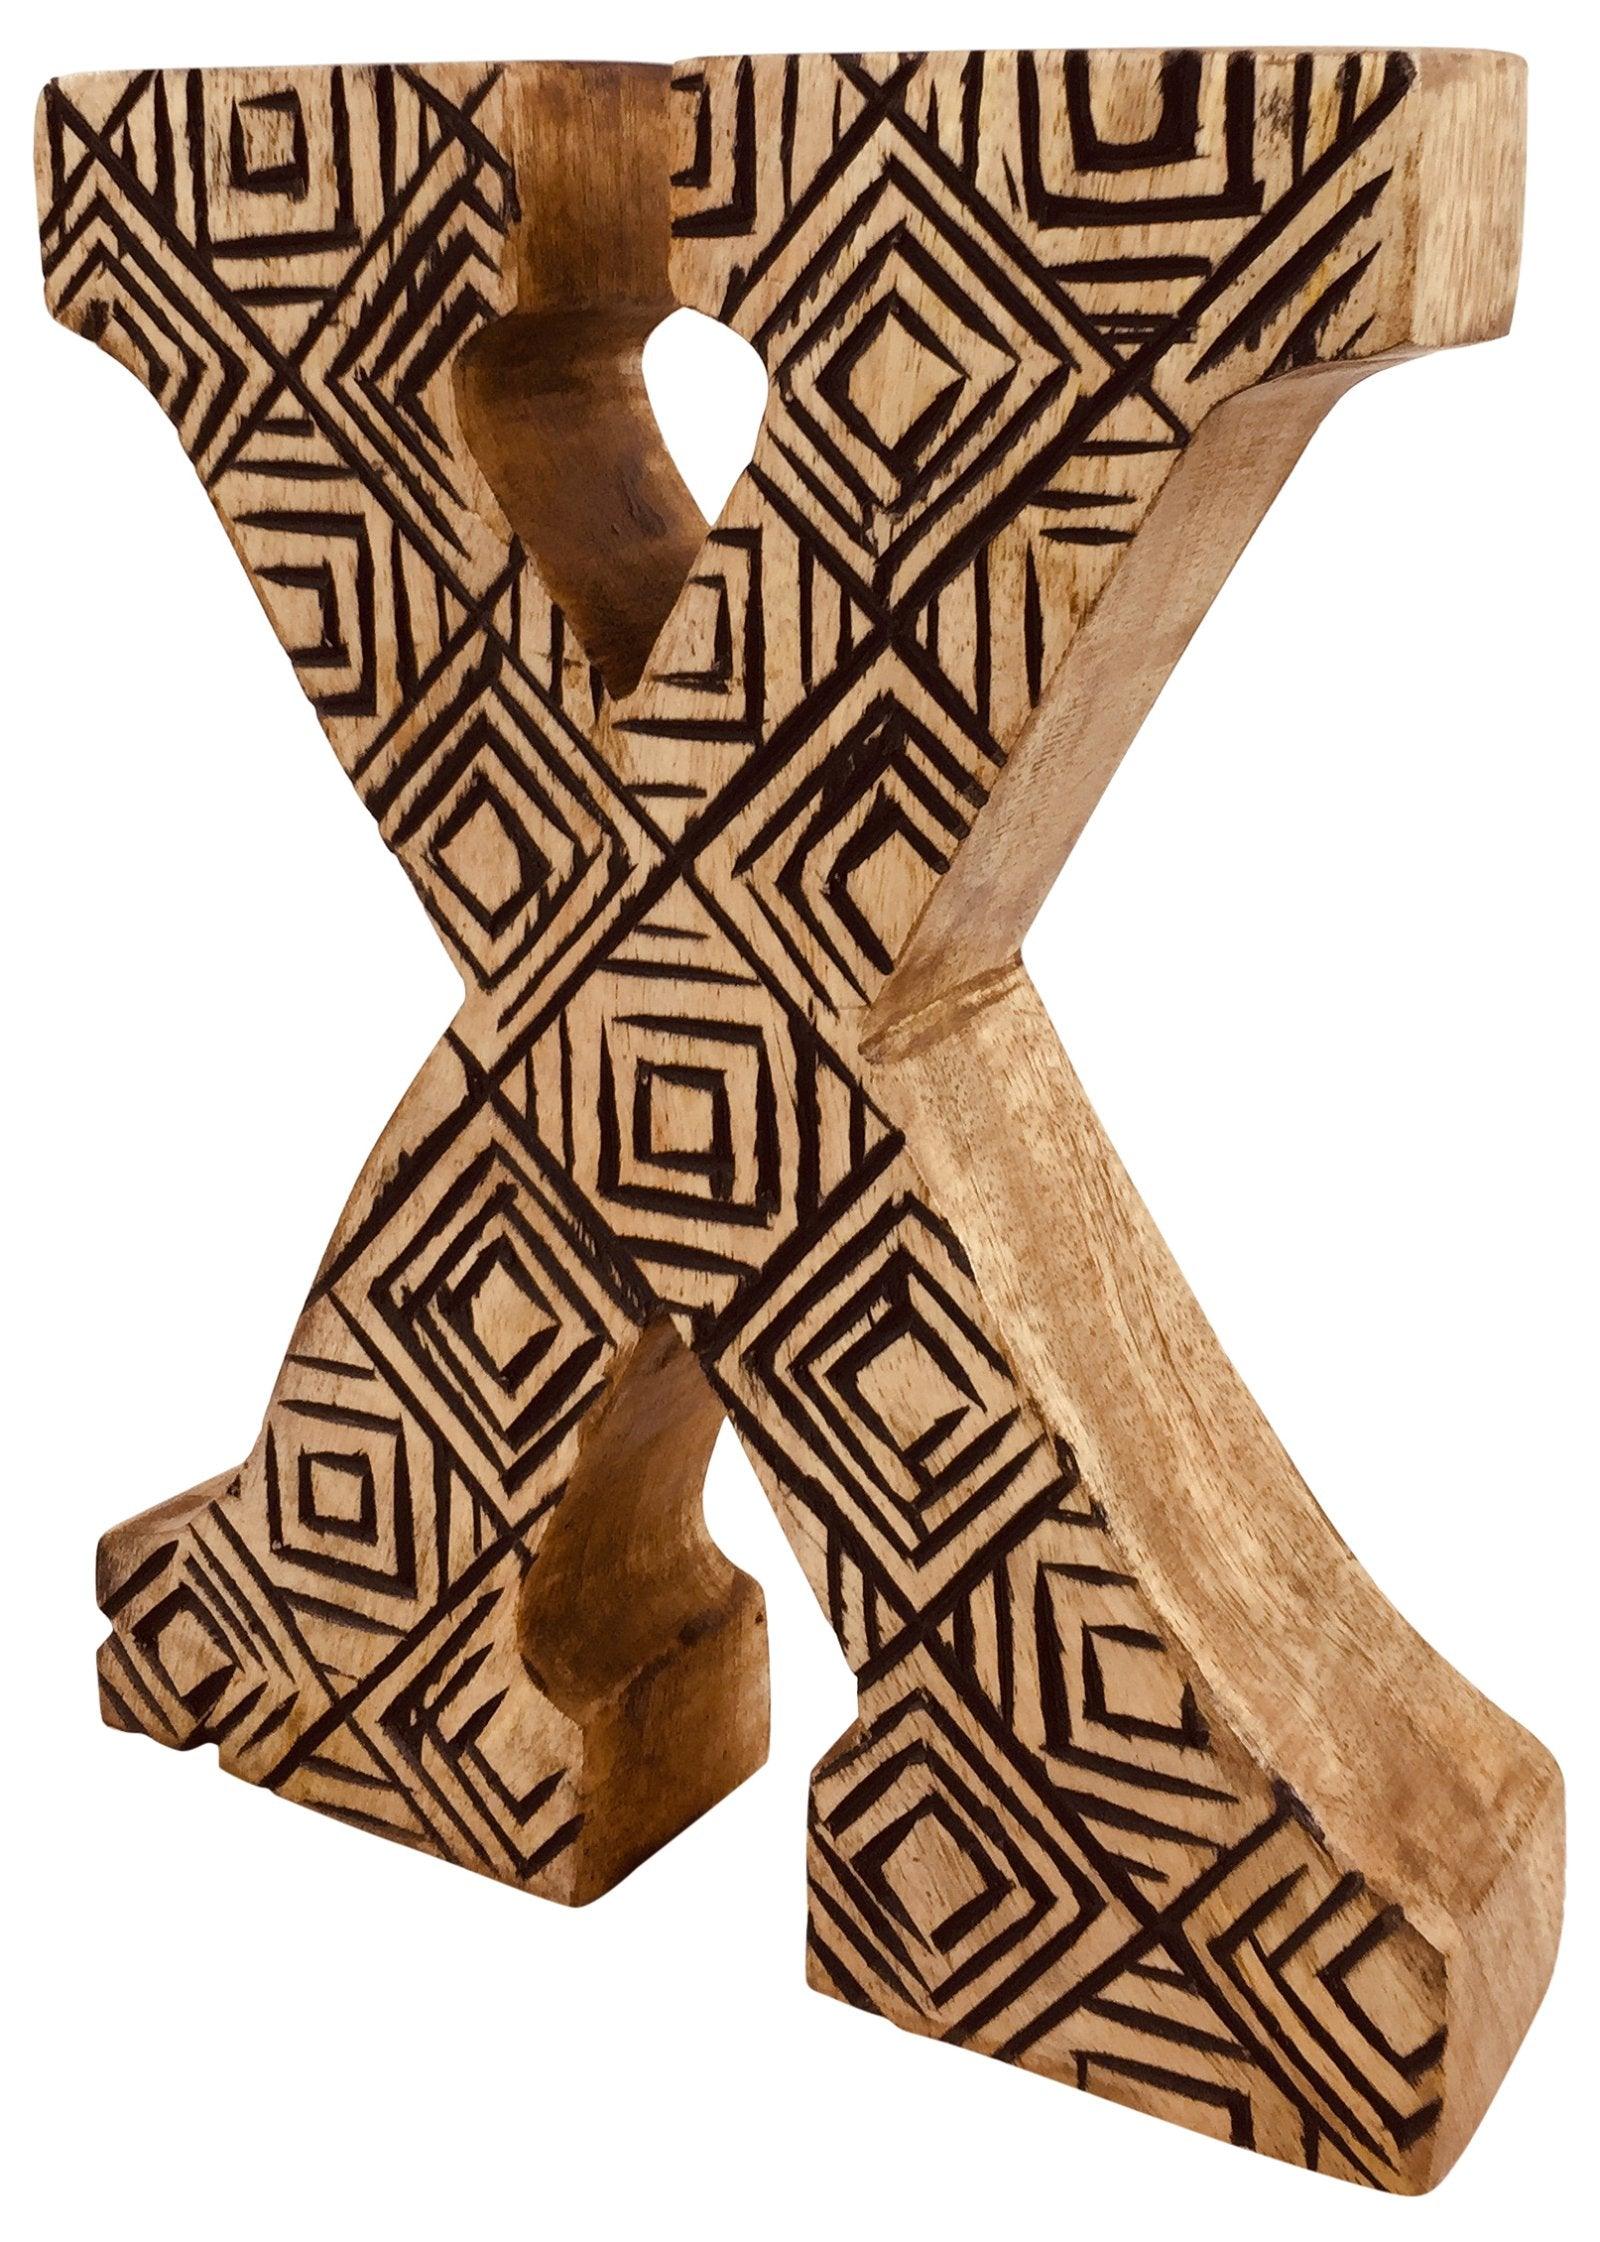 View Hand Carved Wooden Geometric Letter X information